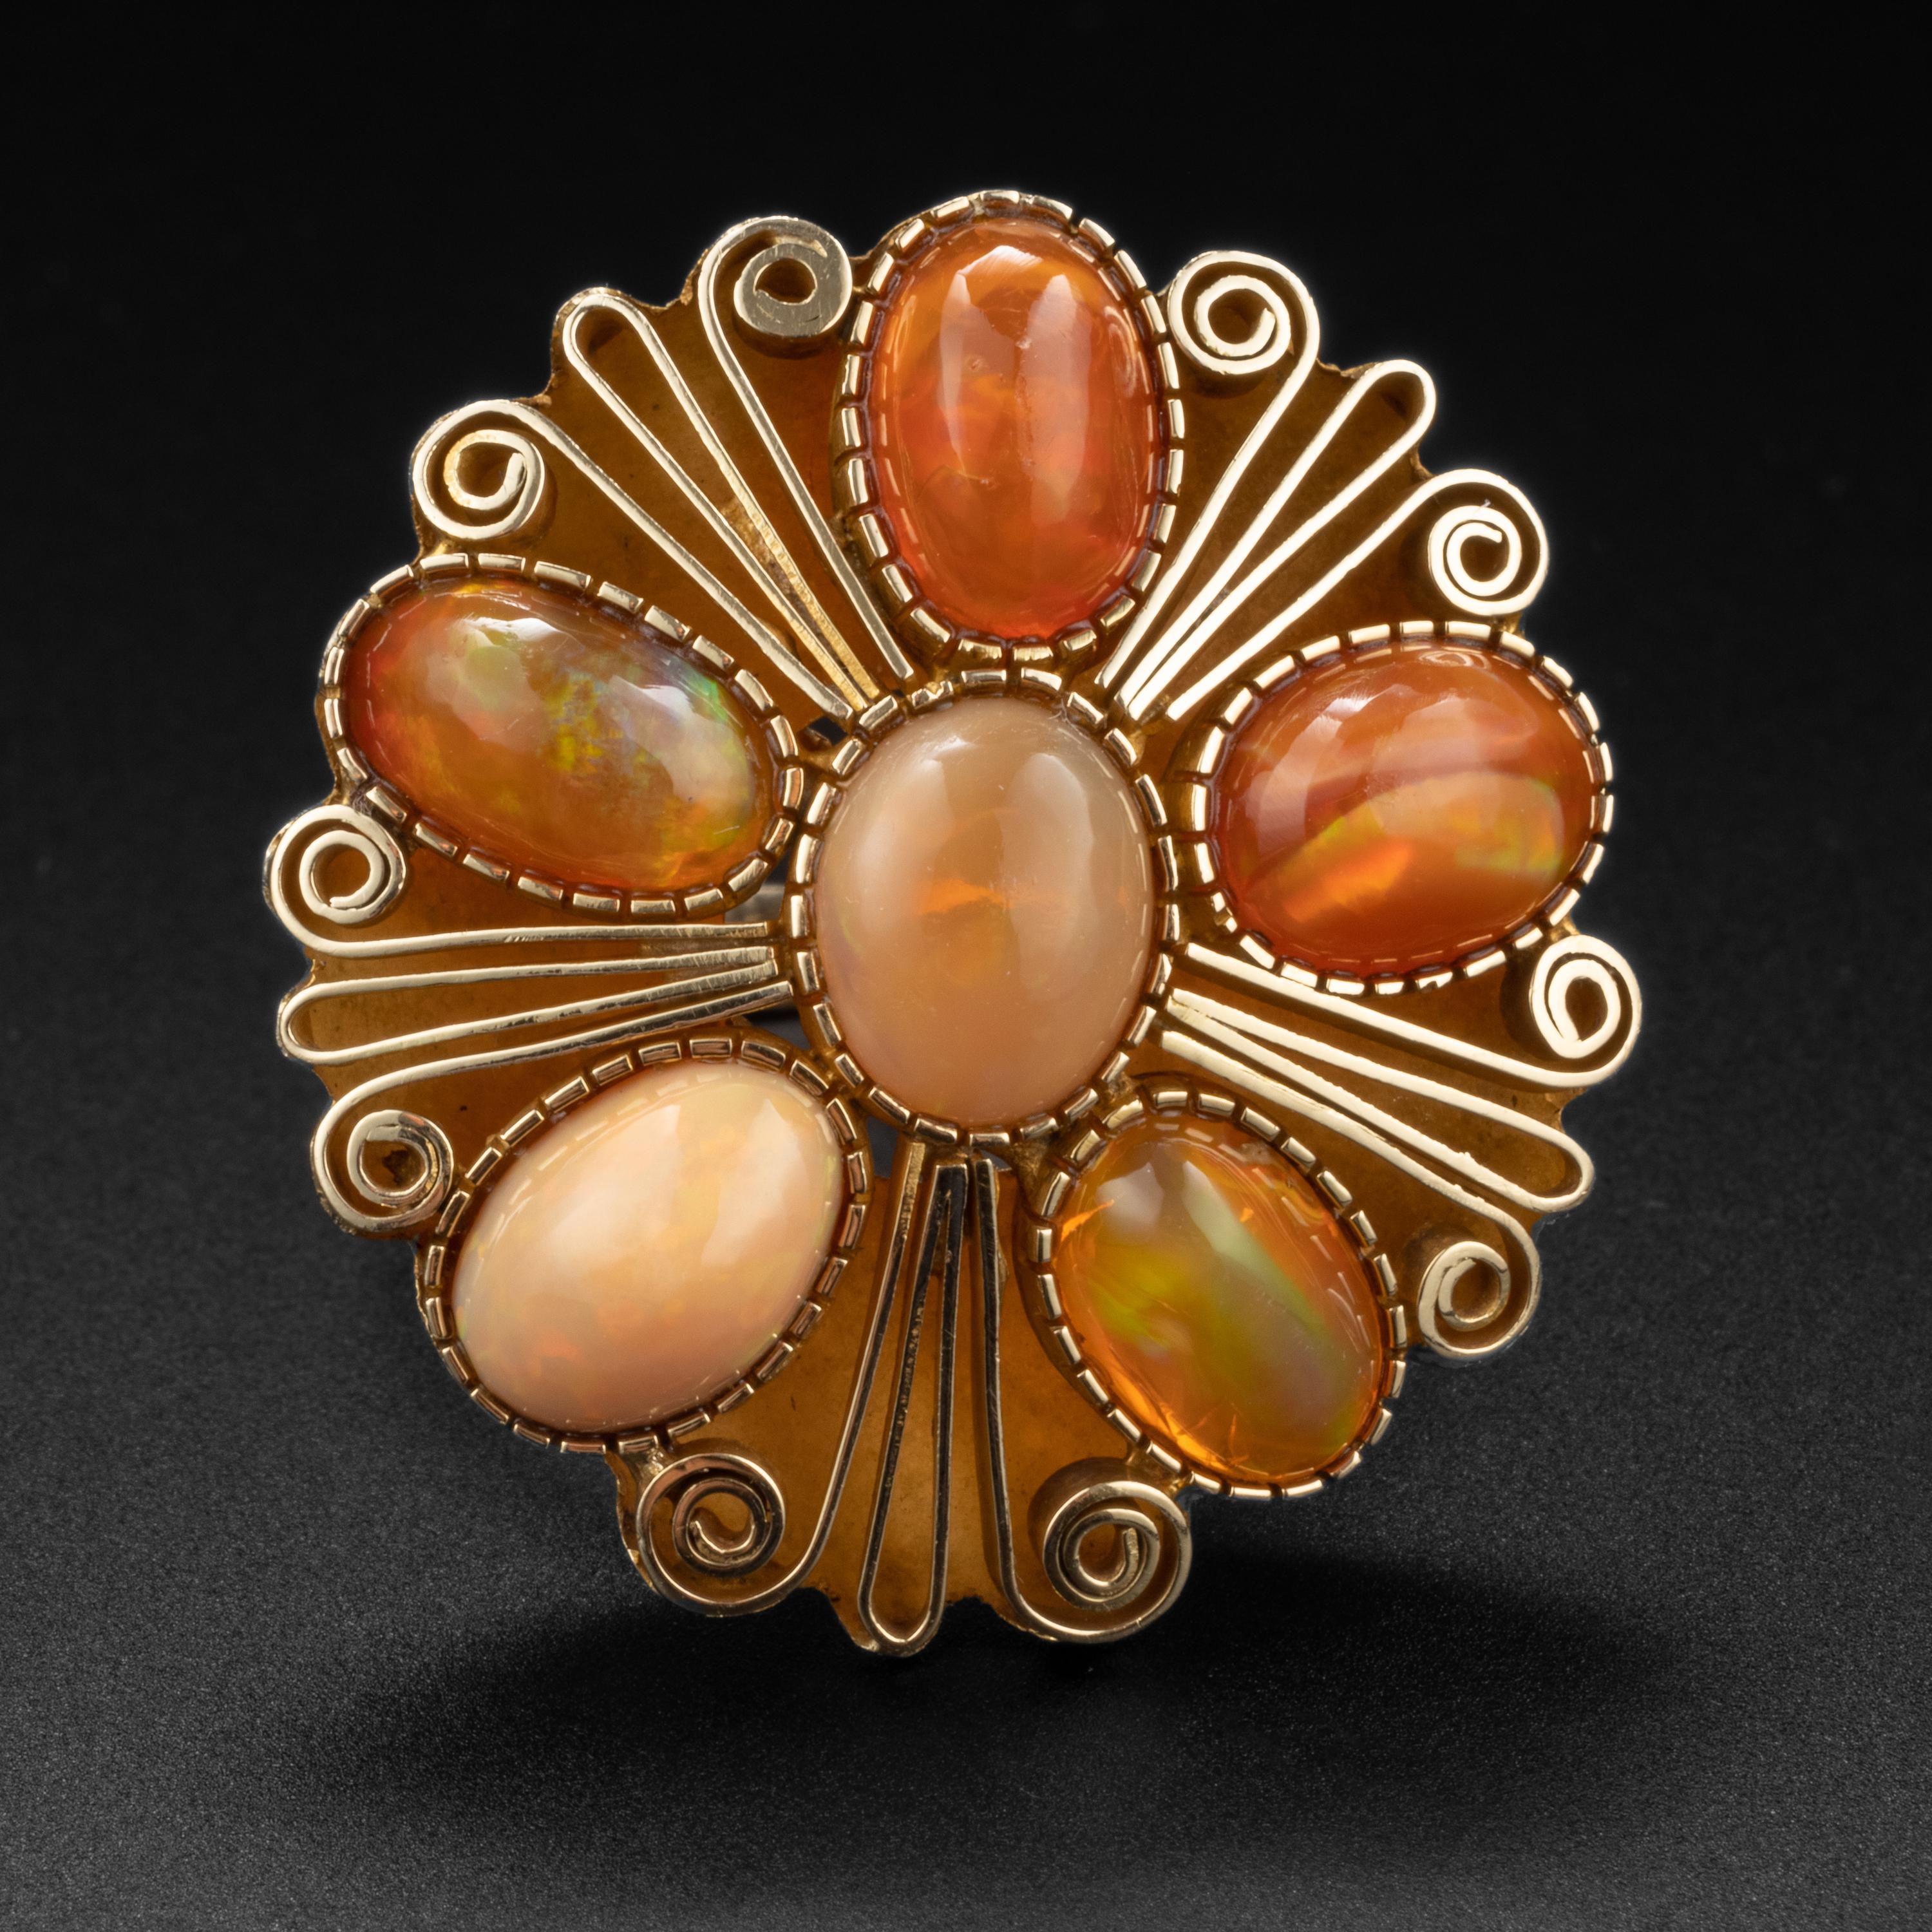 A spectacular and utterly unique 14K yellow gold ring from the Retro era (circa 1940s) featuring six cabochons of natural fire opals from Mexico. These gorgeous and highly-prized gems measure from 9.2mm x 6.7mm to 8.8mm x 6mm. They display orange,